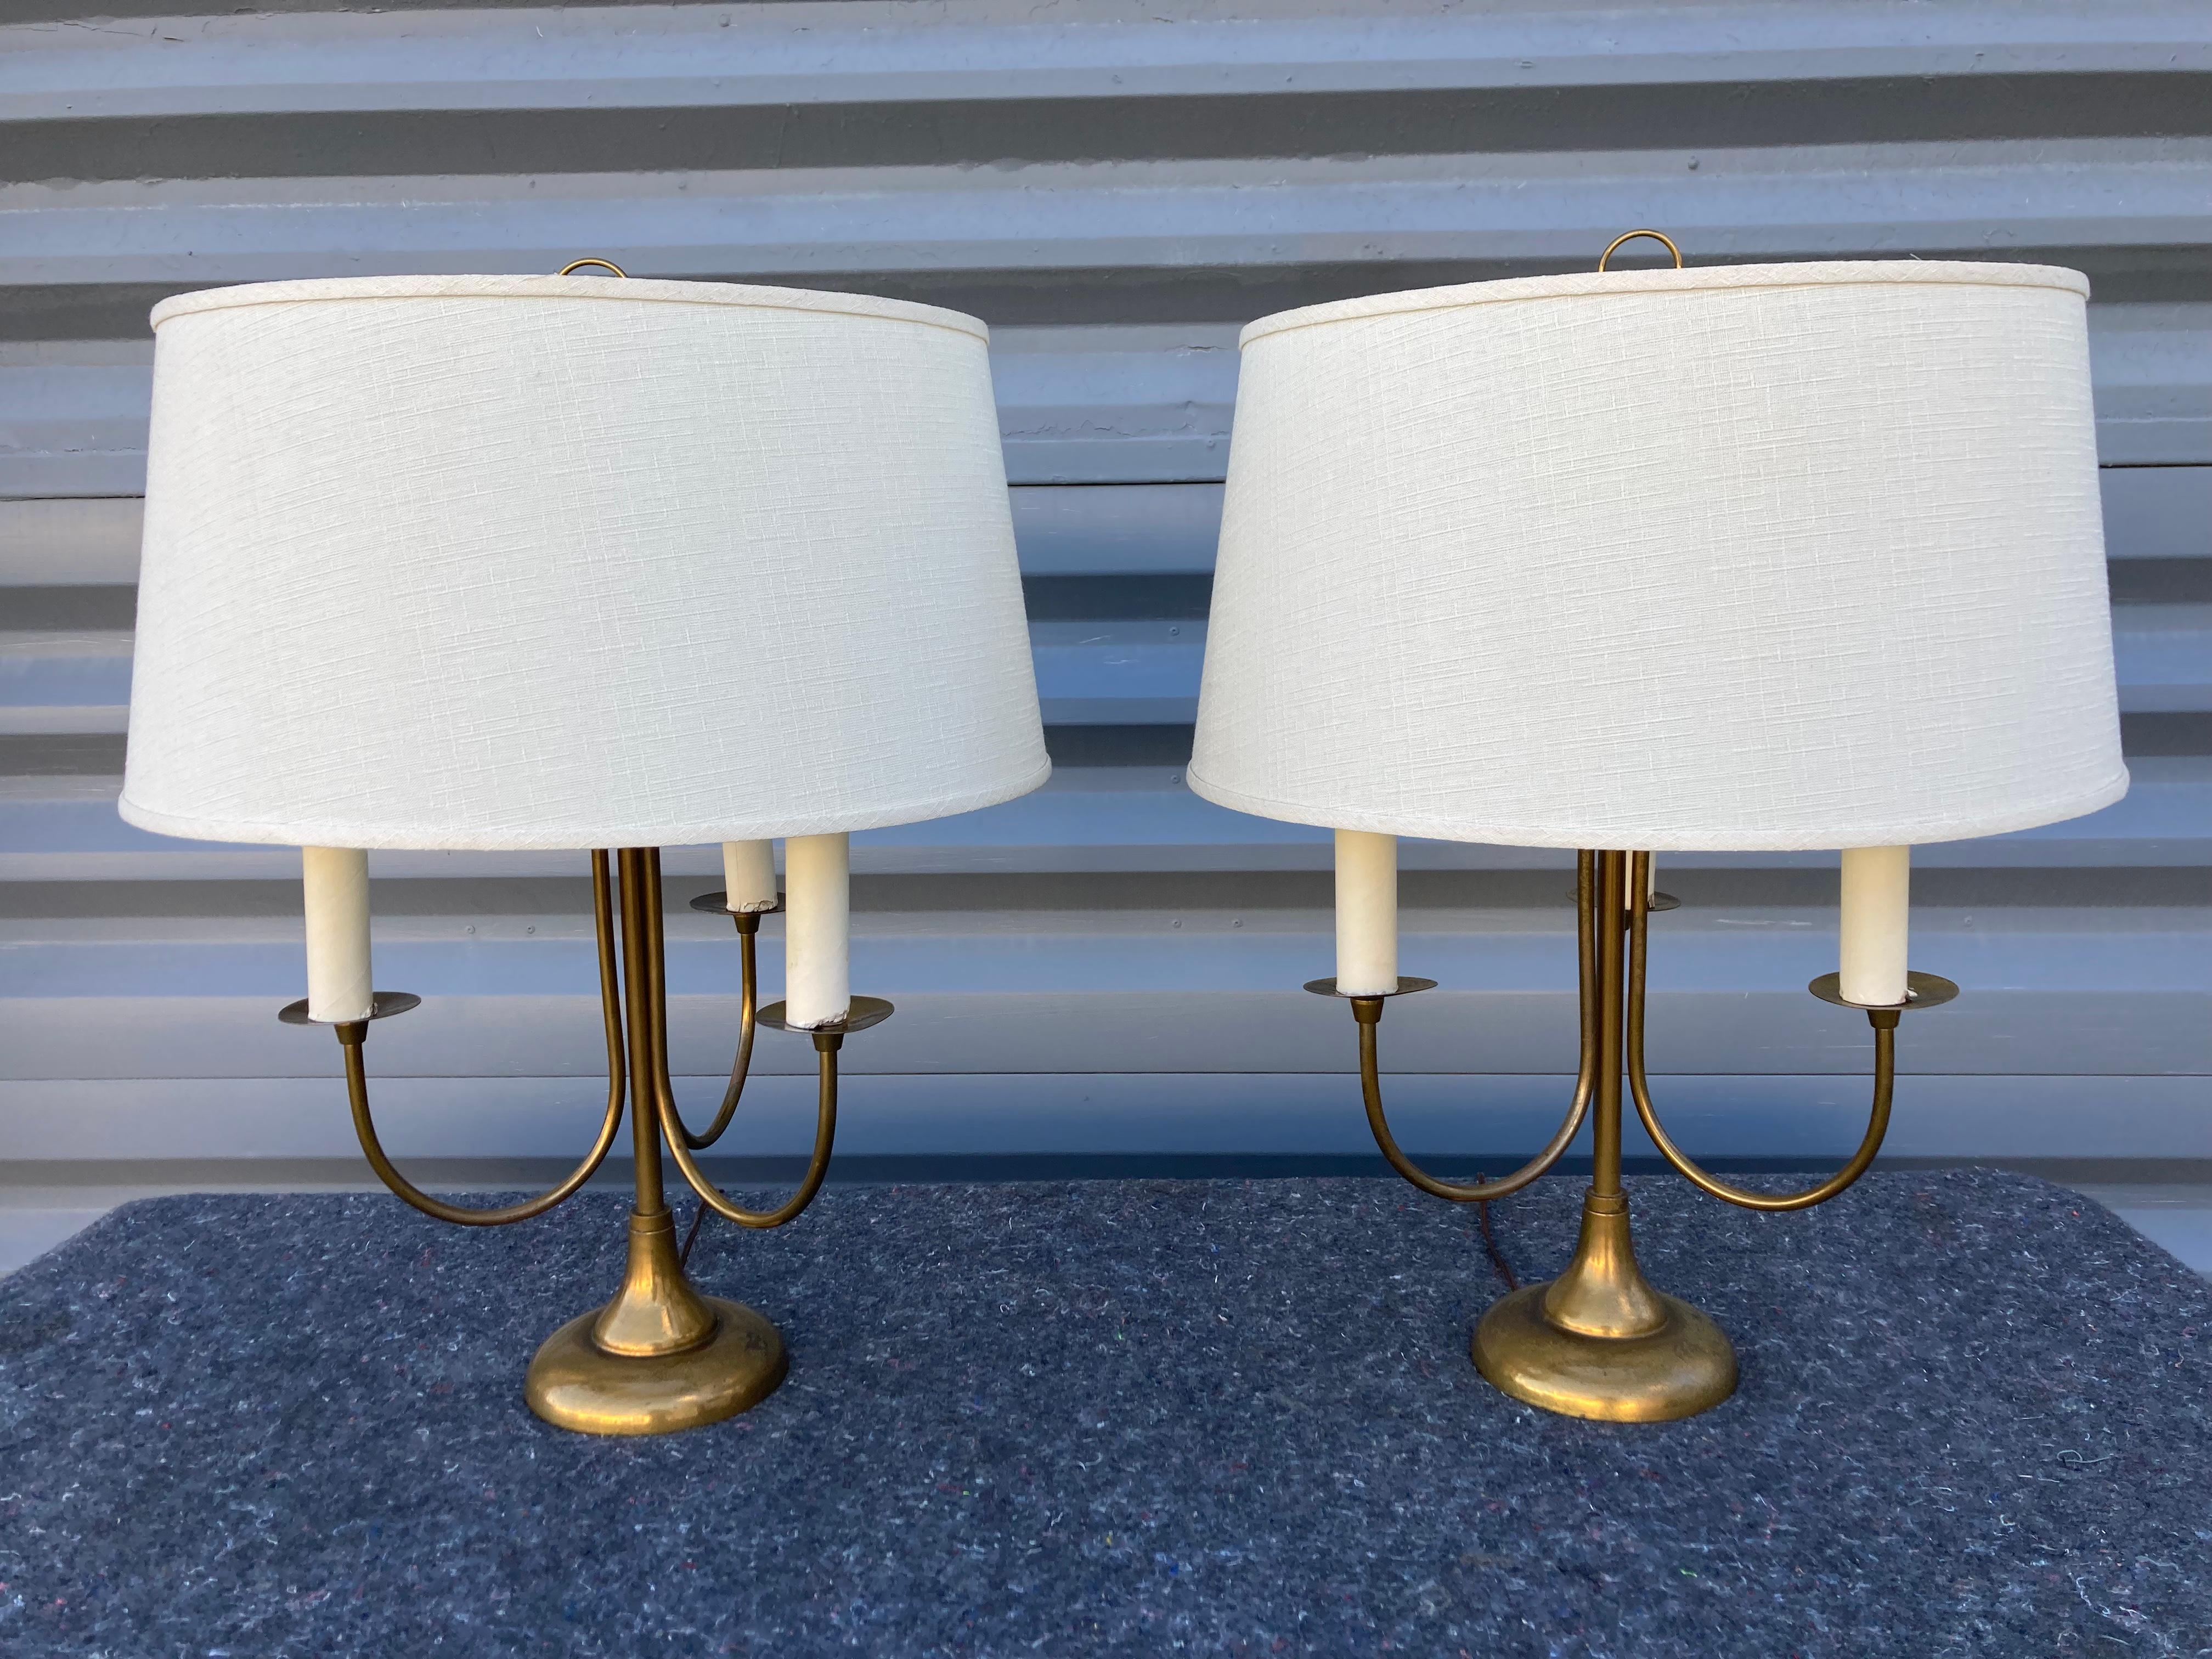 Metal Pair of Mid-Century Modern Table Lamps, Brass, USA, 1950s For Sale